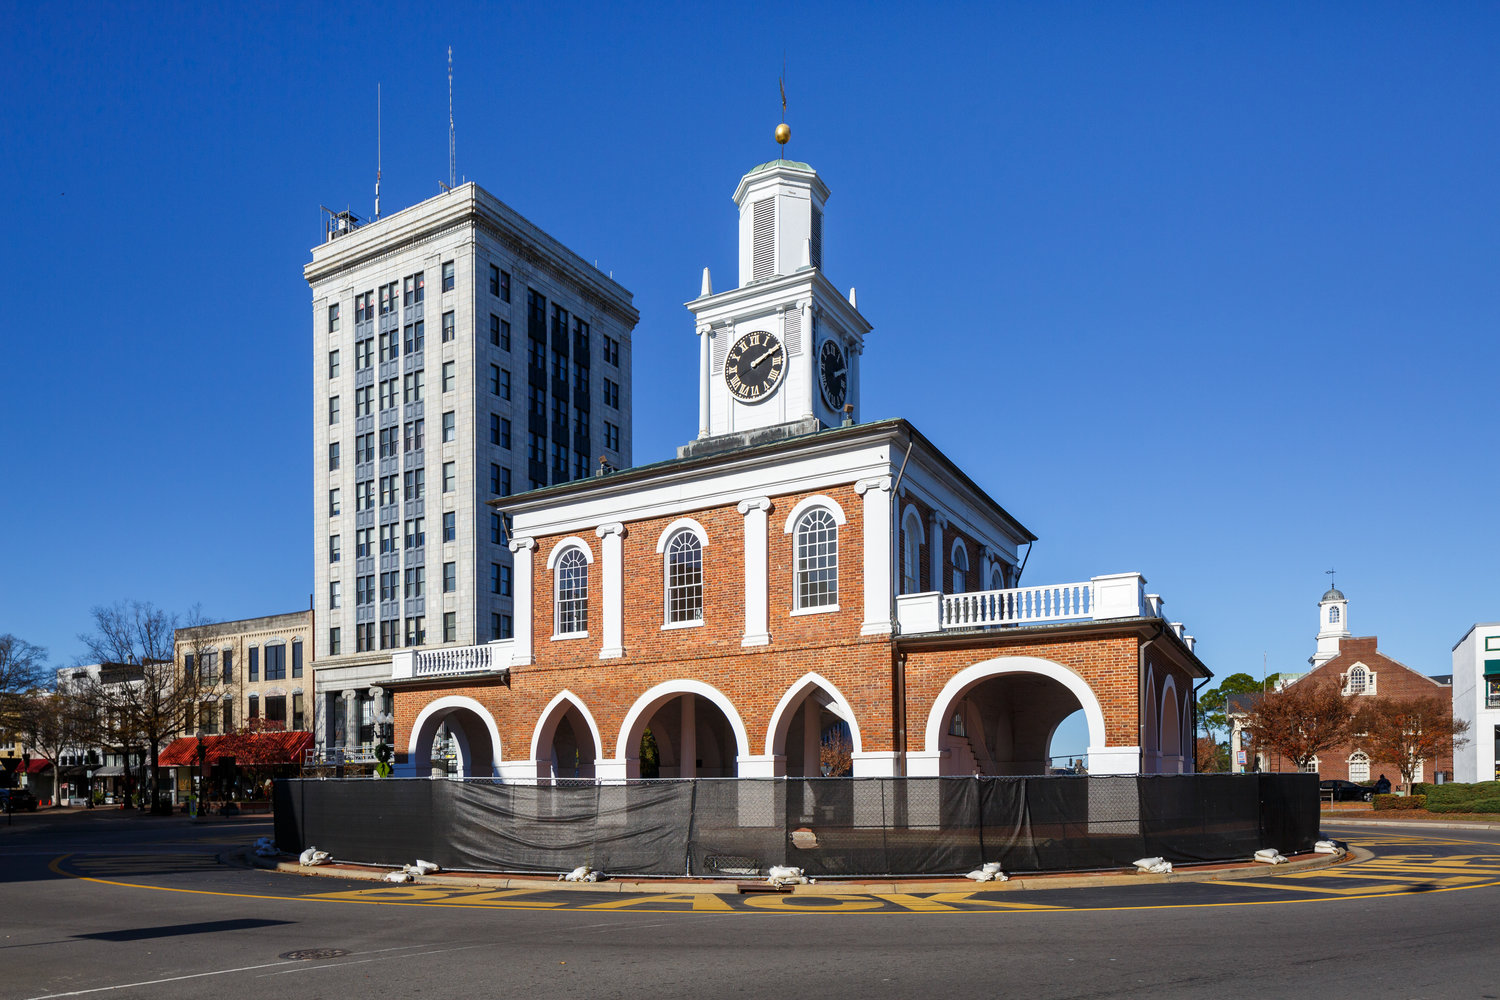 The protective fencing around the Market House is expected to come down by the middle of the month, the city said this week.